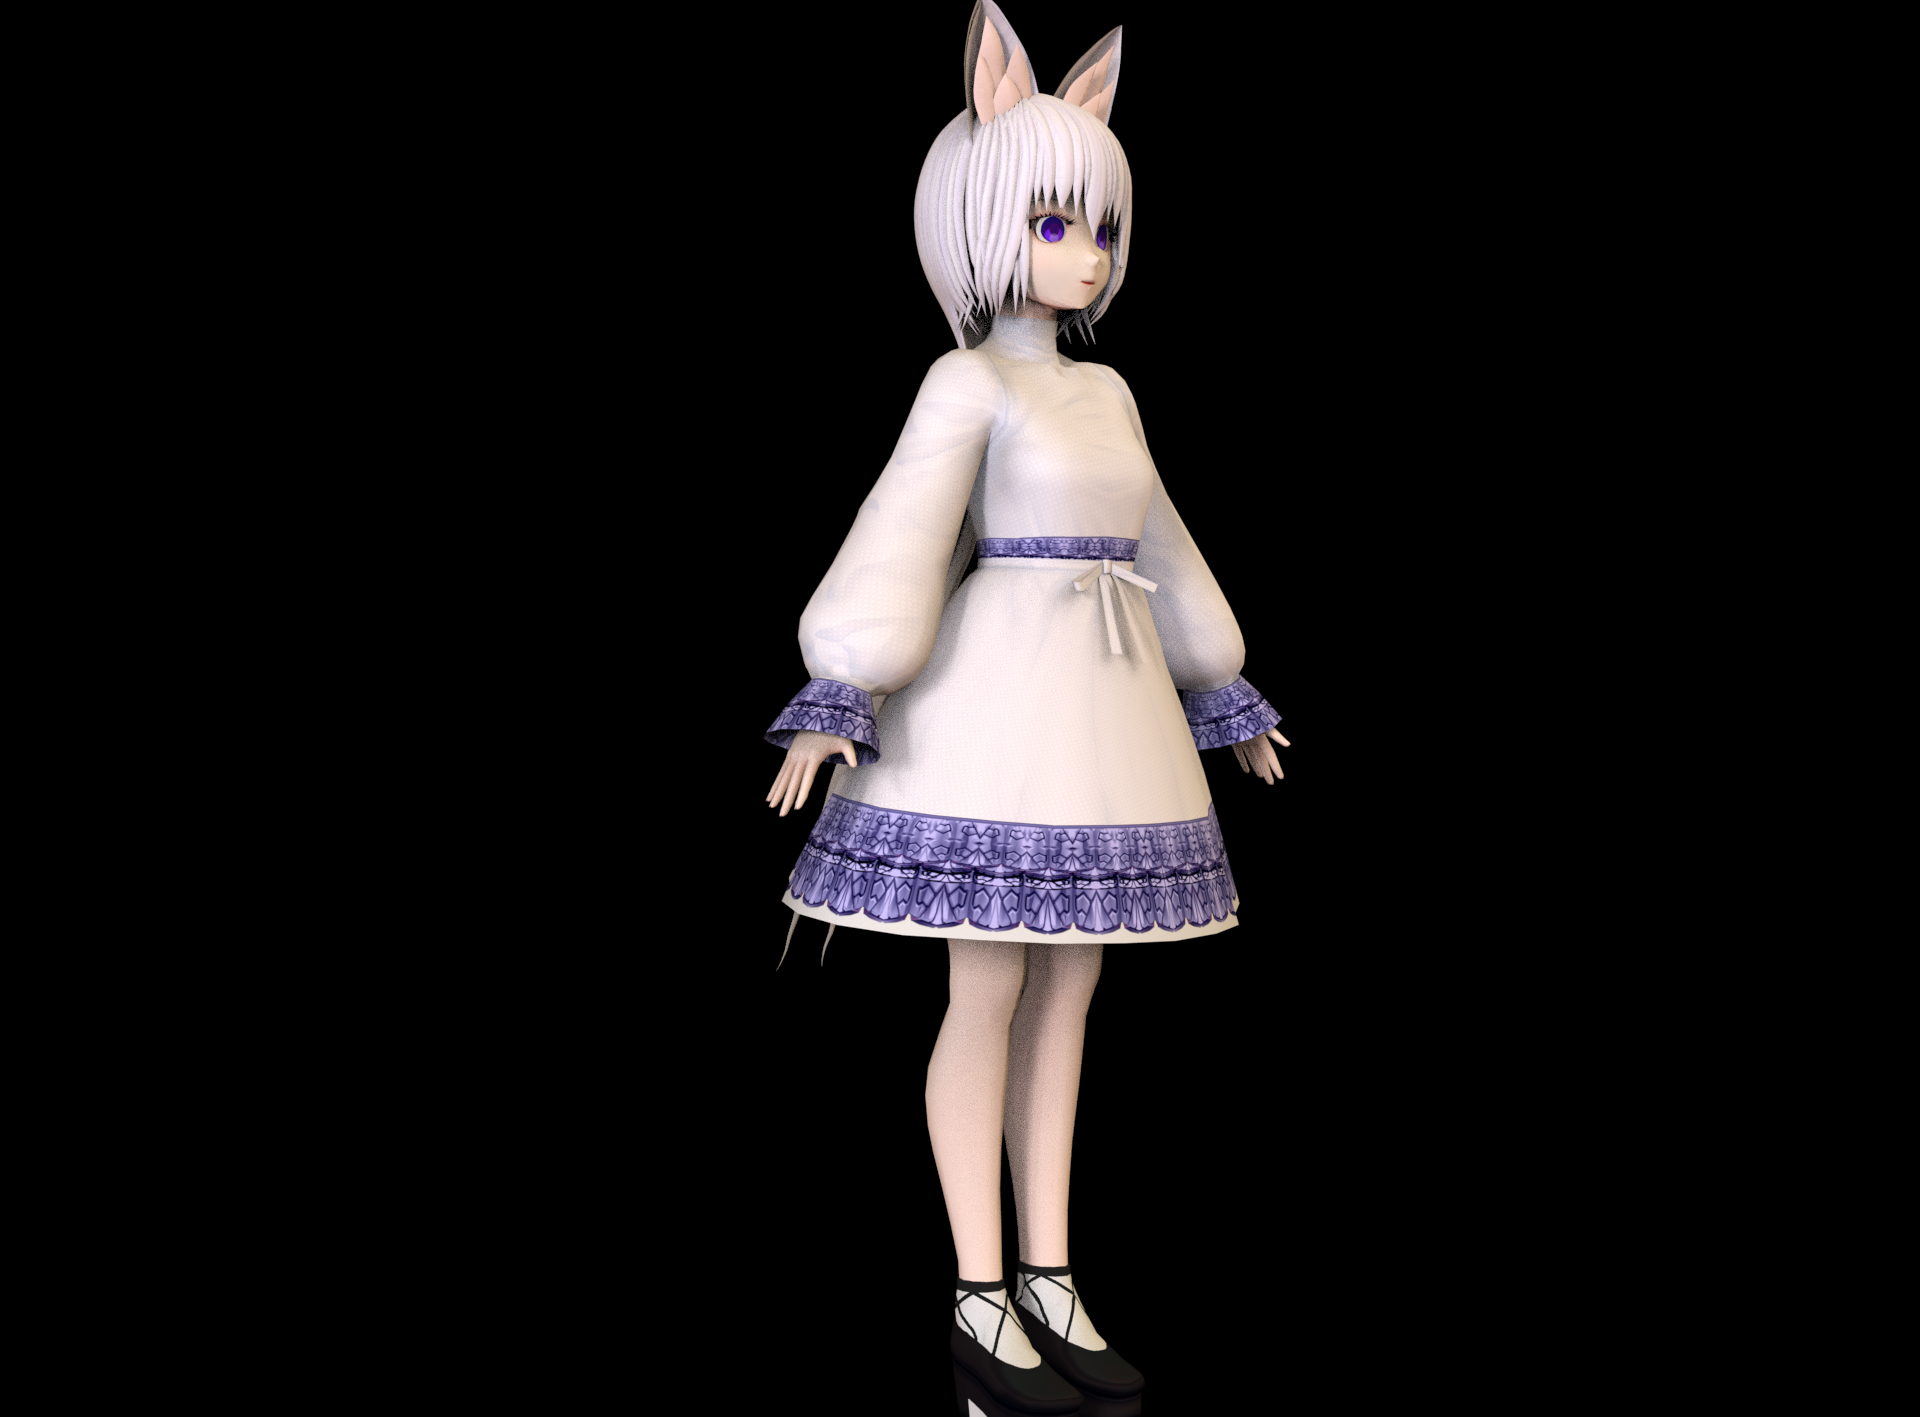 untitled.78.png Download STL file ANIME CHARACTER GIRL SCULPTURE 3D PRINT MODEL 2 • 3D print object, 3DCNC